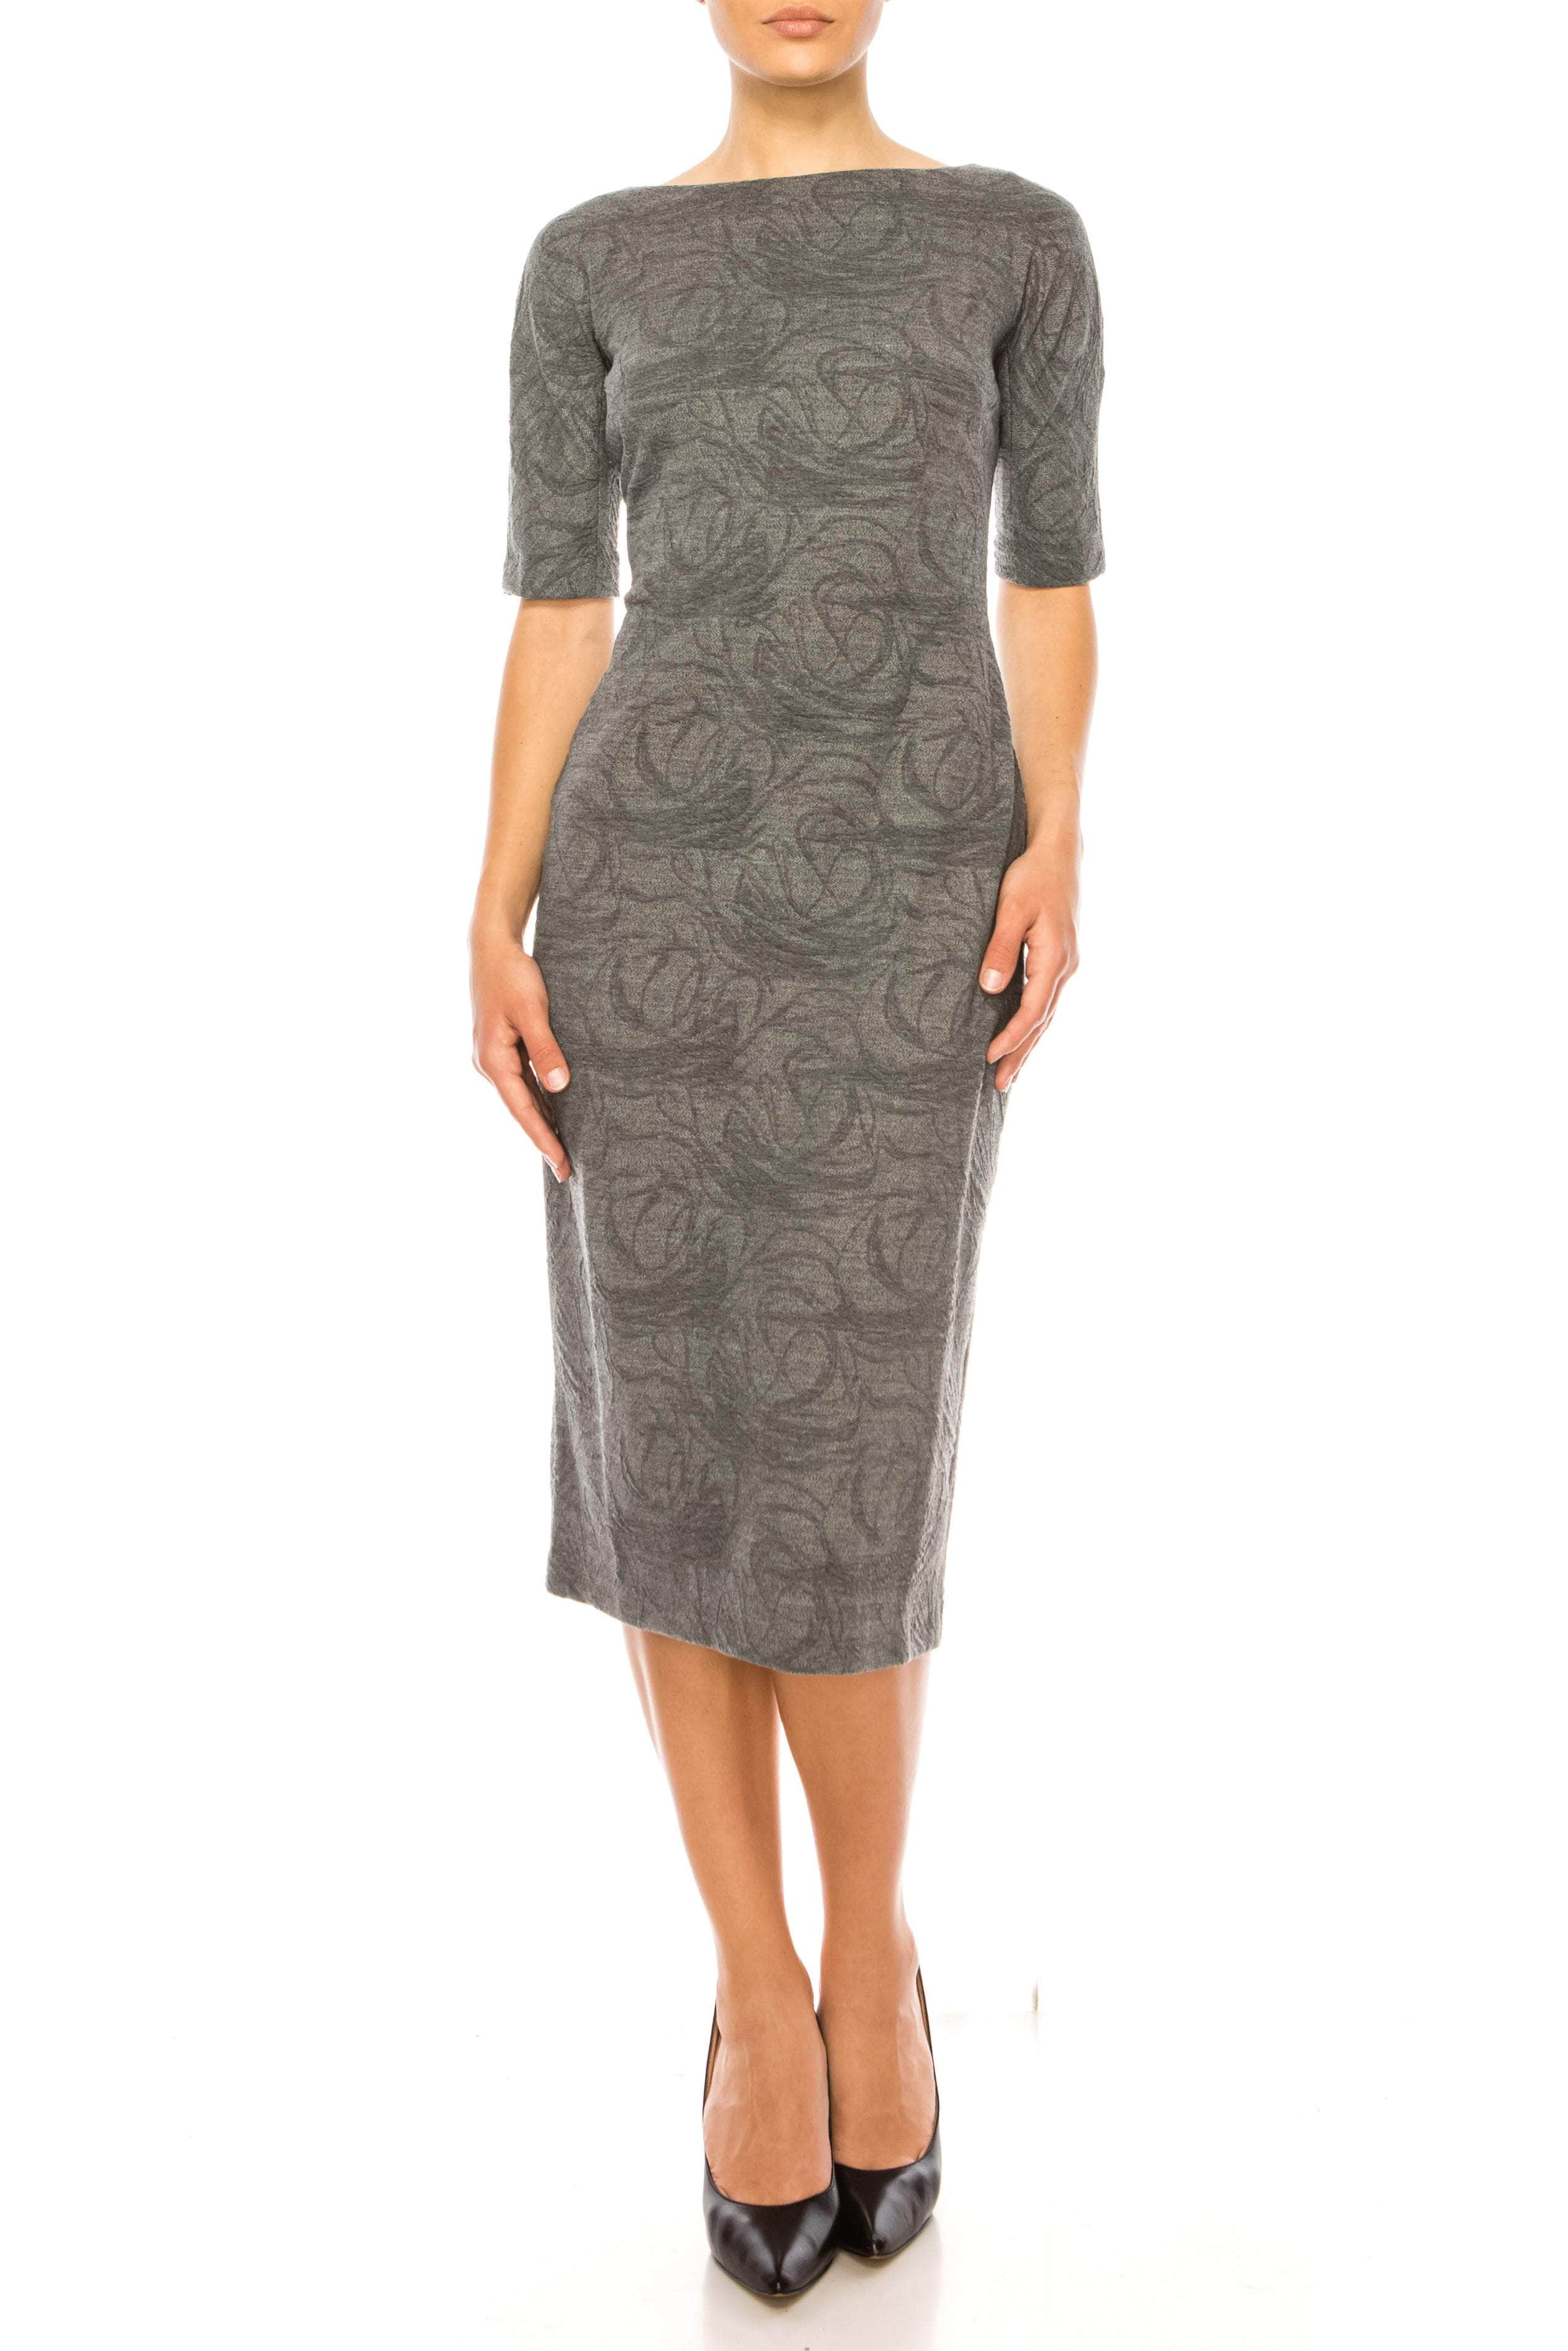 Image of Maggy London GT158M - Fitted Jacquard Dress